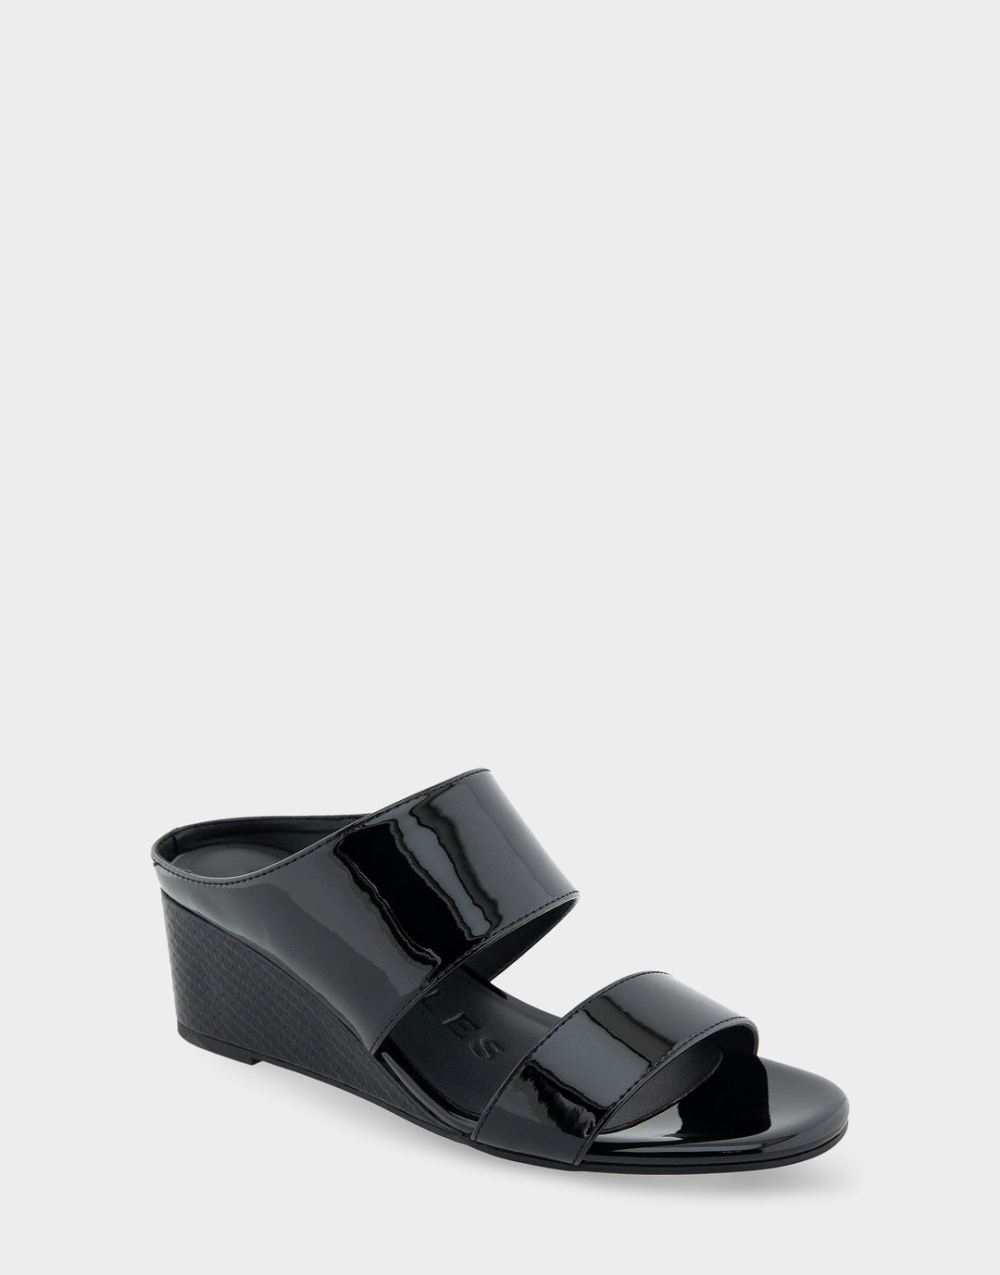 Women's | Wheeler Black Patent Faux Leather Two Band Mid Wedge Slide Sandal